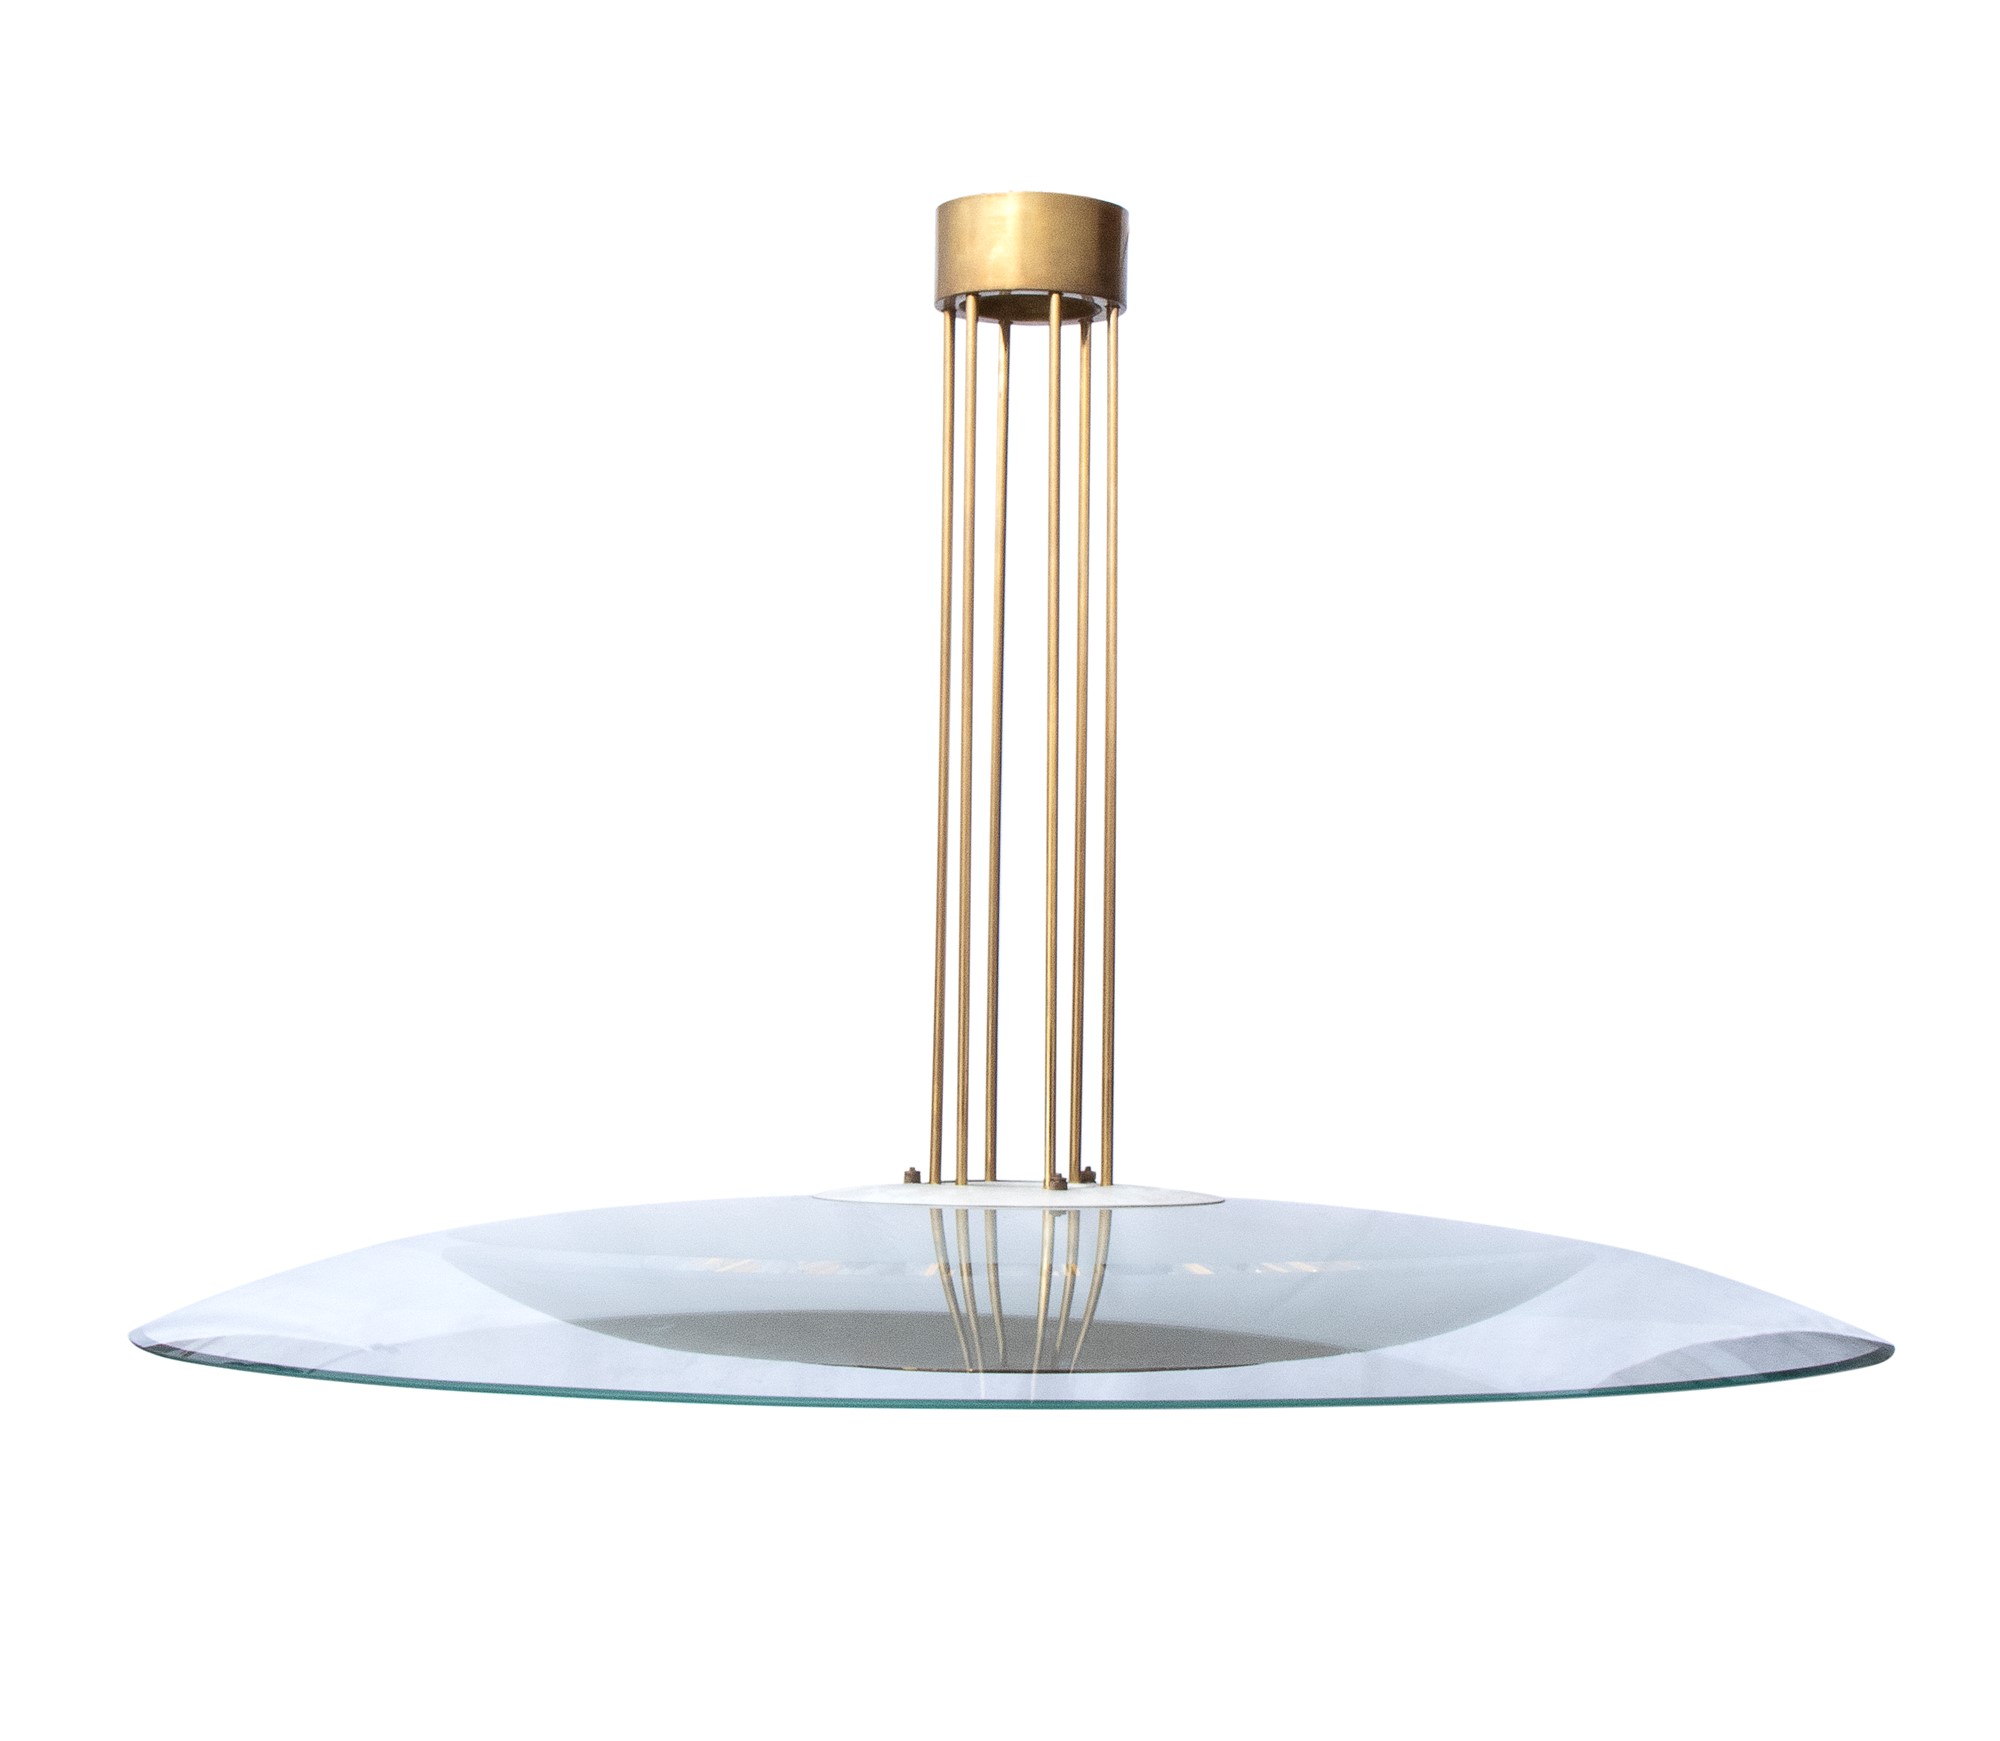 Max Ingrand Ceiling lamp mod. 1498 with brass structure, satin glass screen and crystal cup - Image 3 of 19